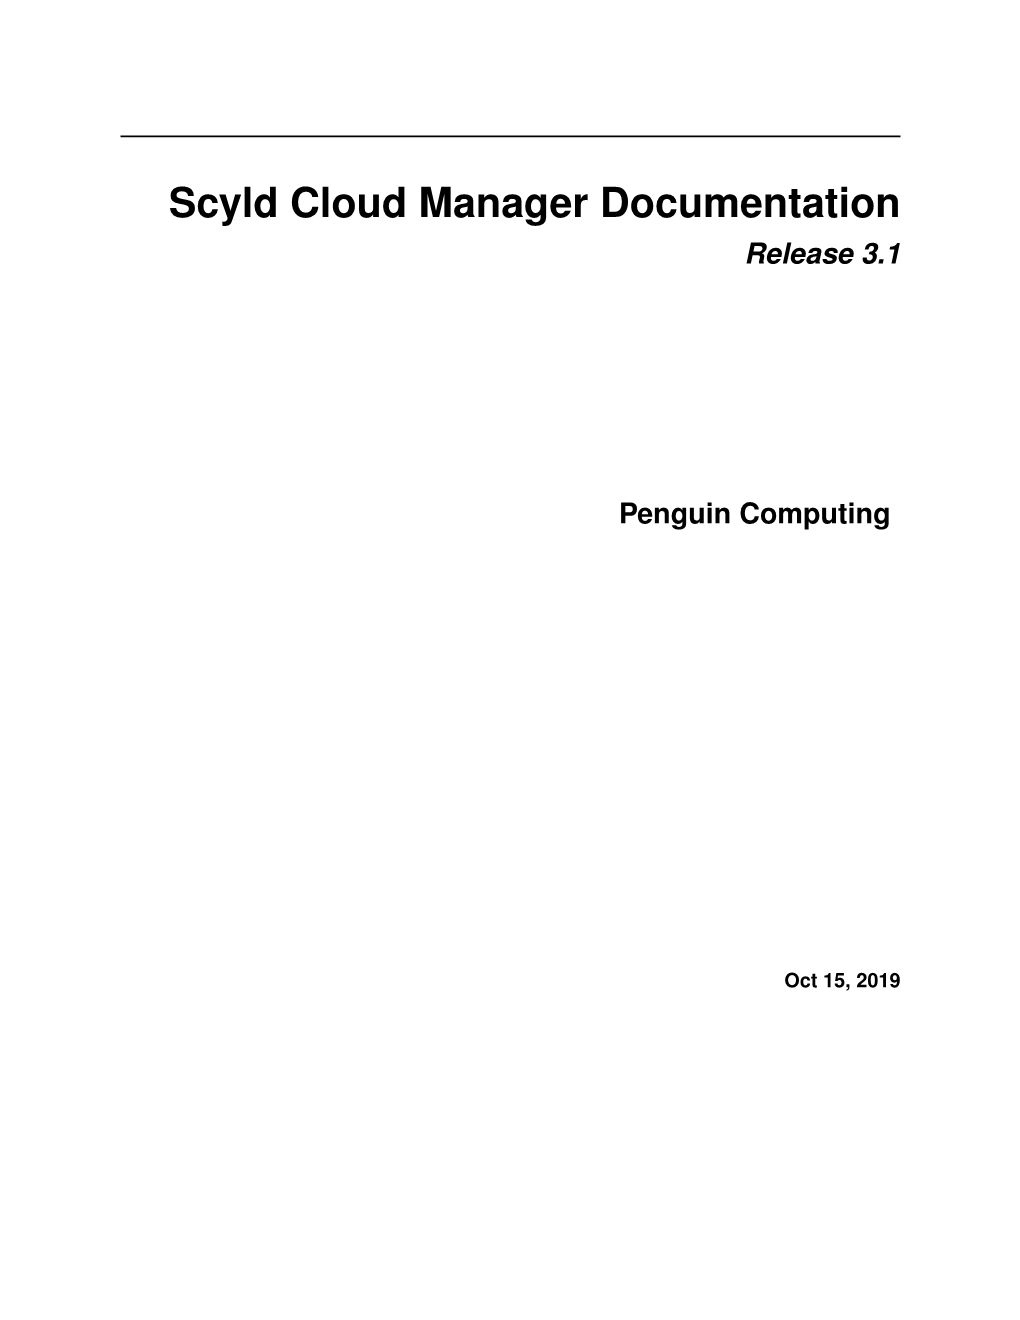 Scyld Cloud Manager Documentation Release 3.1